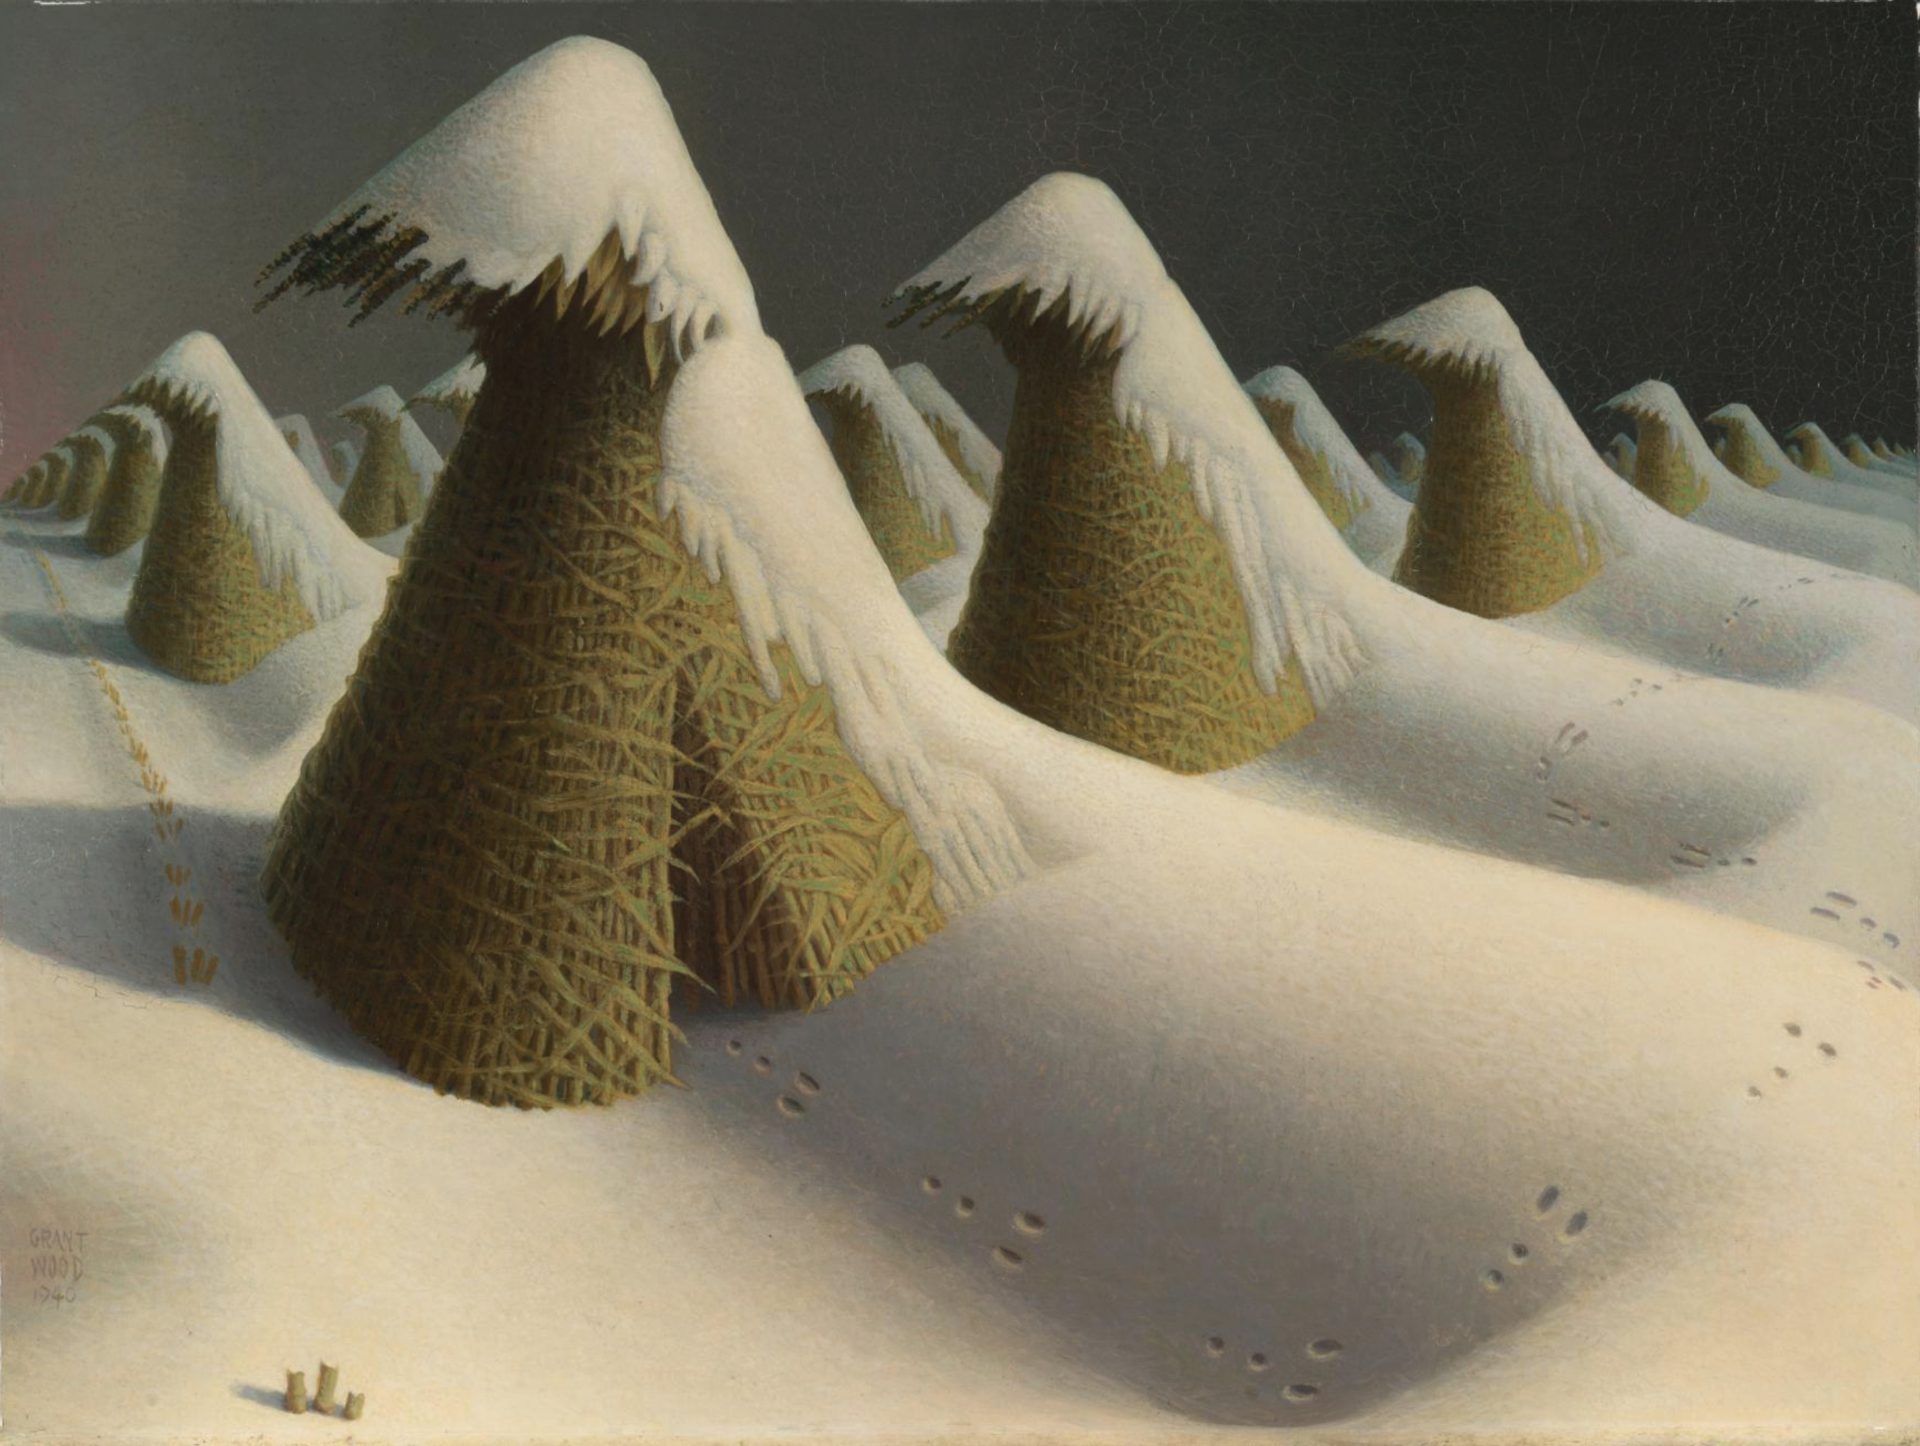 The painting depicts a serene winter landscape in the rural Midwest. A field of geometric corn shocks, burdened with snow, extends into the horizon, creating a rhythmic pattern that dominates the composition. The only sign of life is a subtle trail of rabbit tracks disrupting the uniformity of the snow-covered field. This otherwise dormant scene combines abstract design elements with a realistic portrayal of the harshness and tranquility of winter.